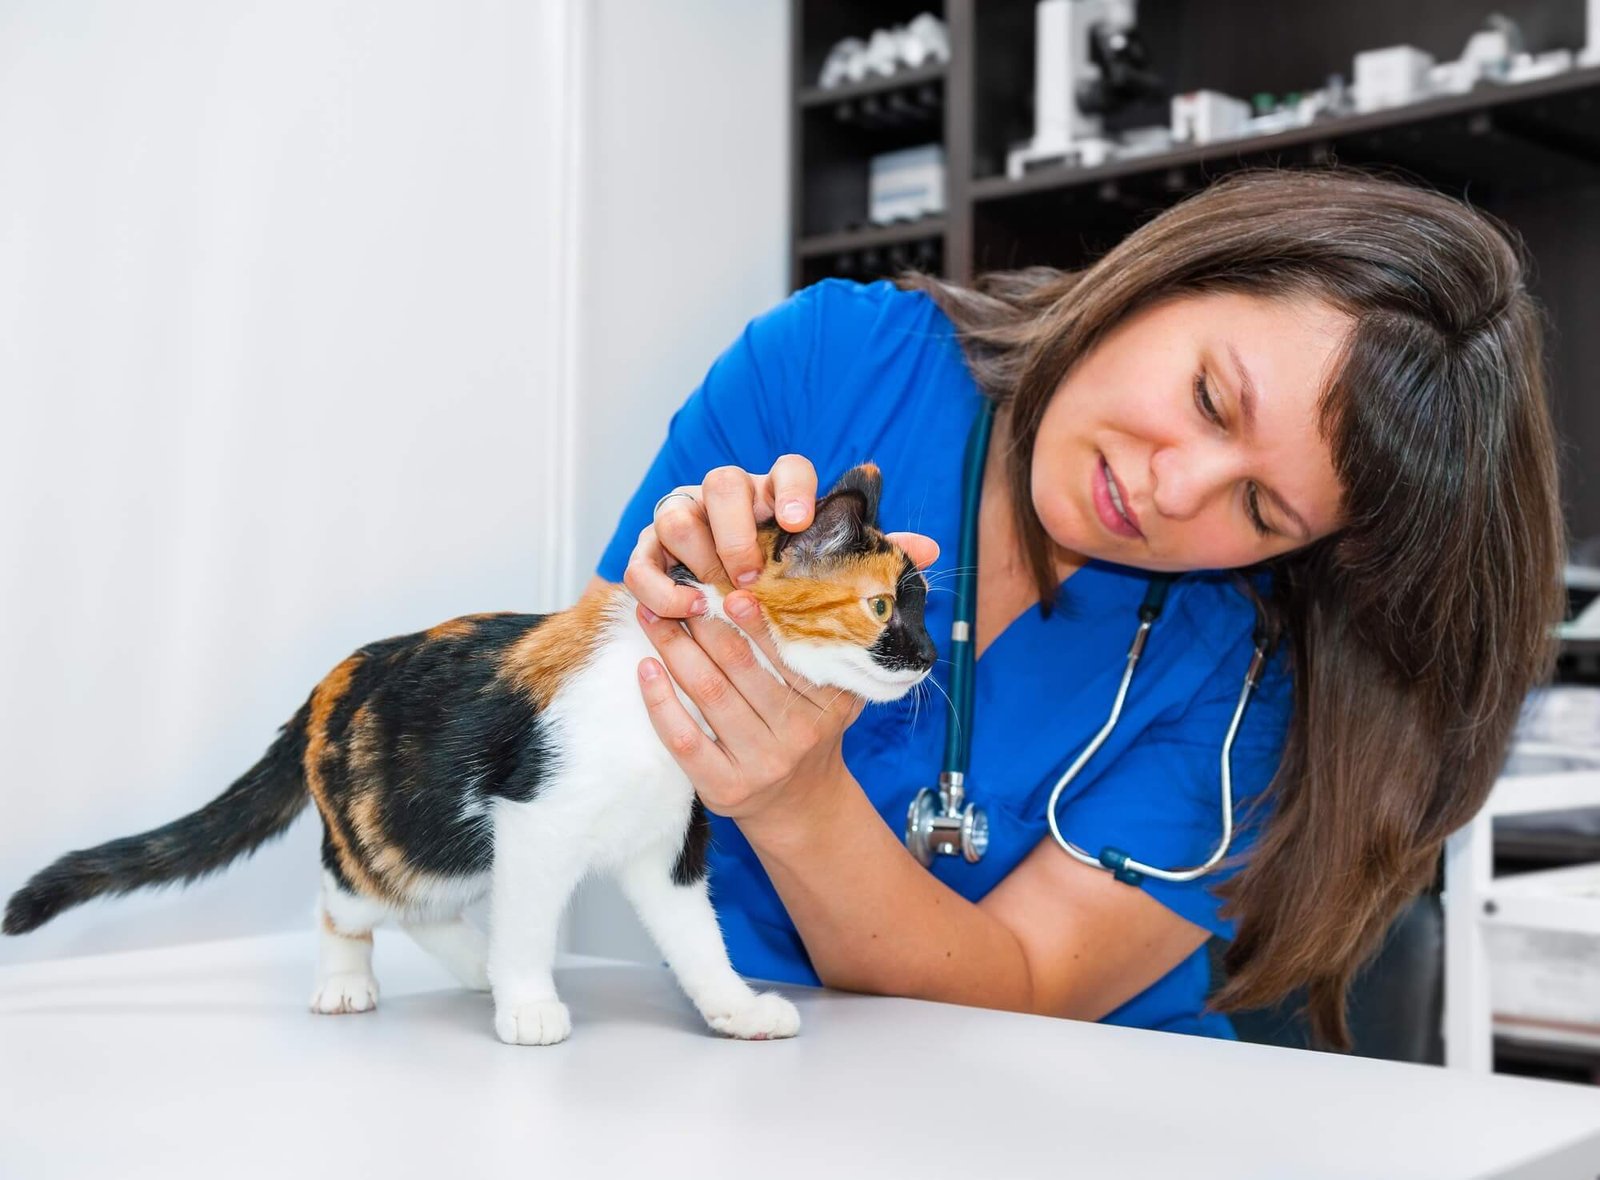 Calico cats need regular vet visits, proper grooming, and a balanced diet